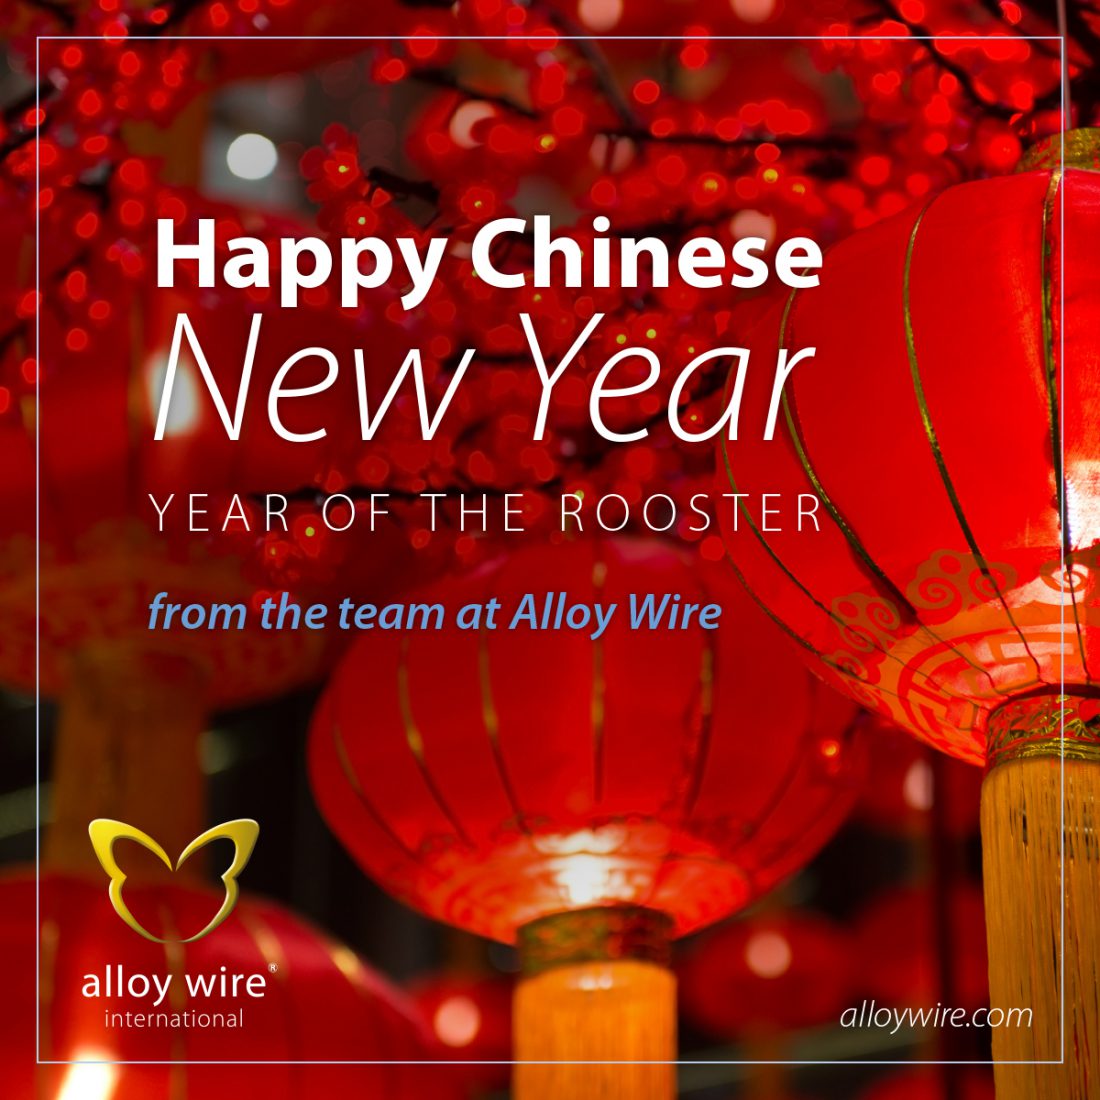 Happy Chinese New Year 2017 - Alloy Wire International 1